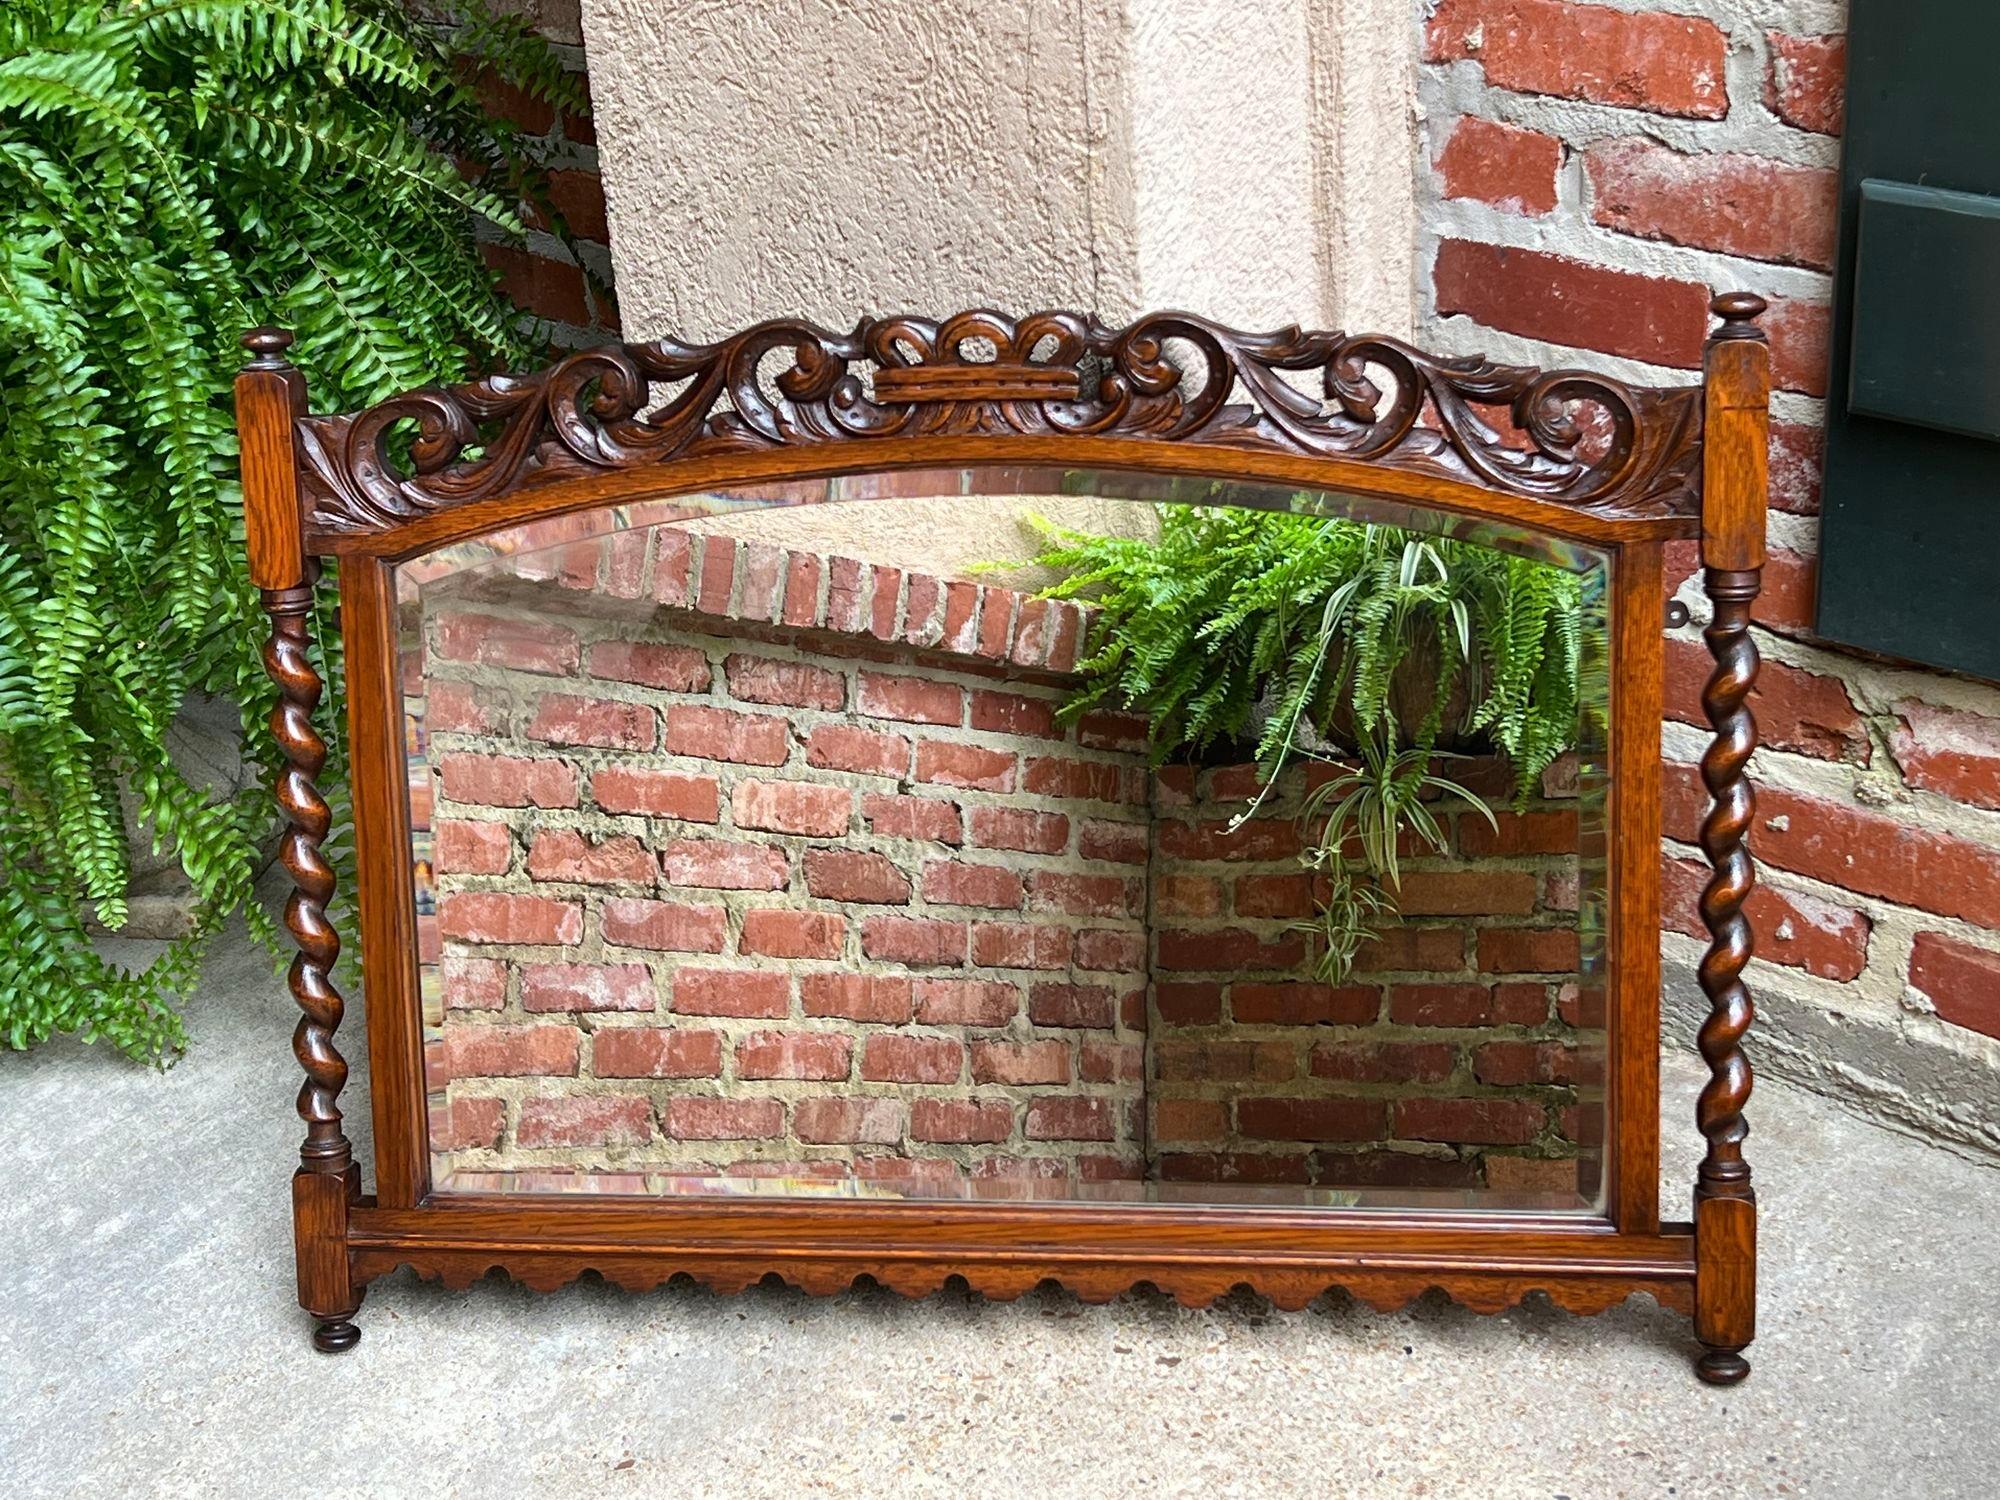 British Antique English Carved Oak Wall Mirror Barley Twist Arched Top Frame Jacobean For Sale